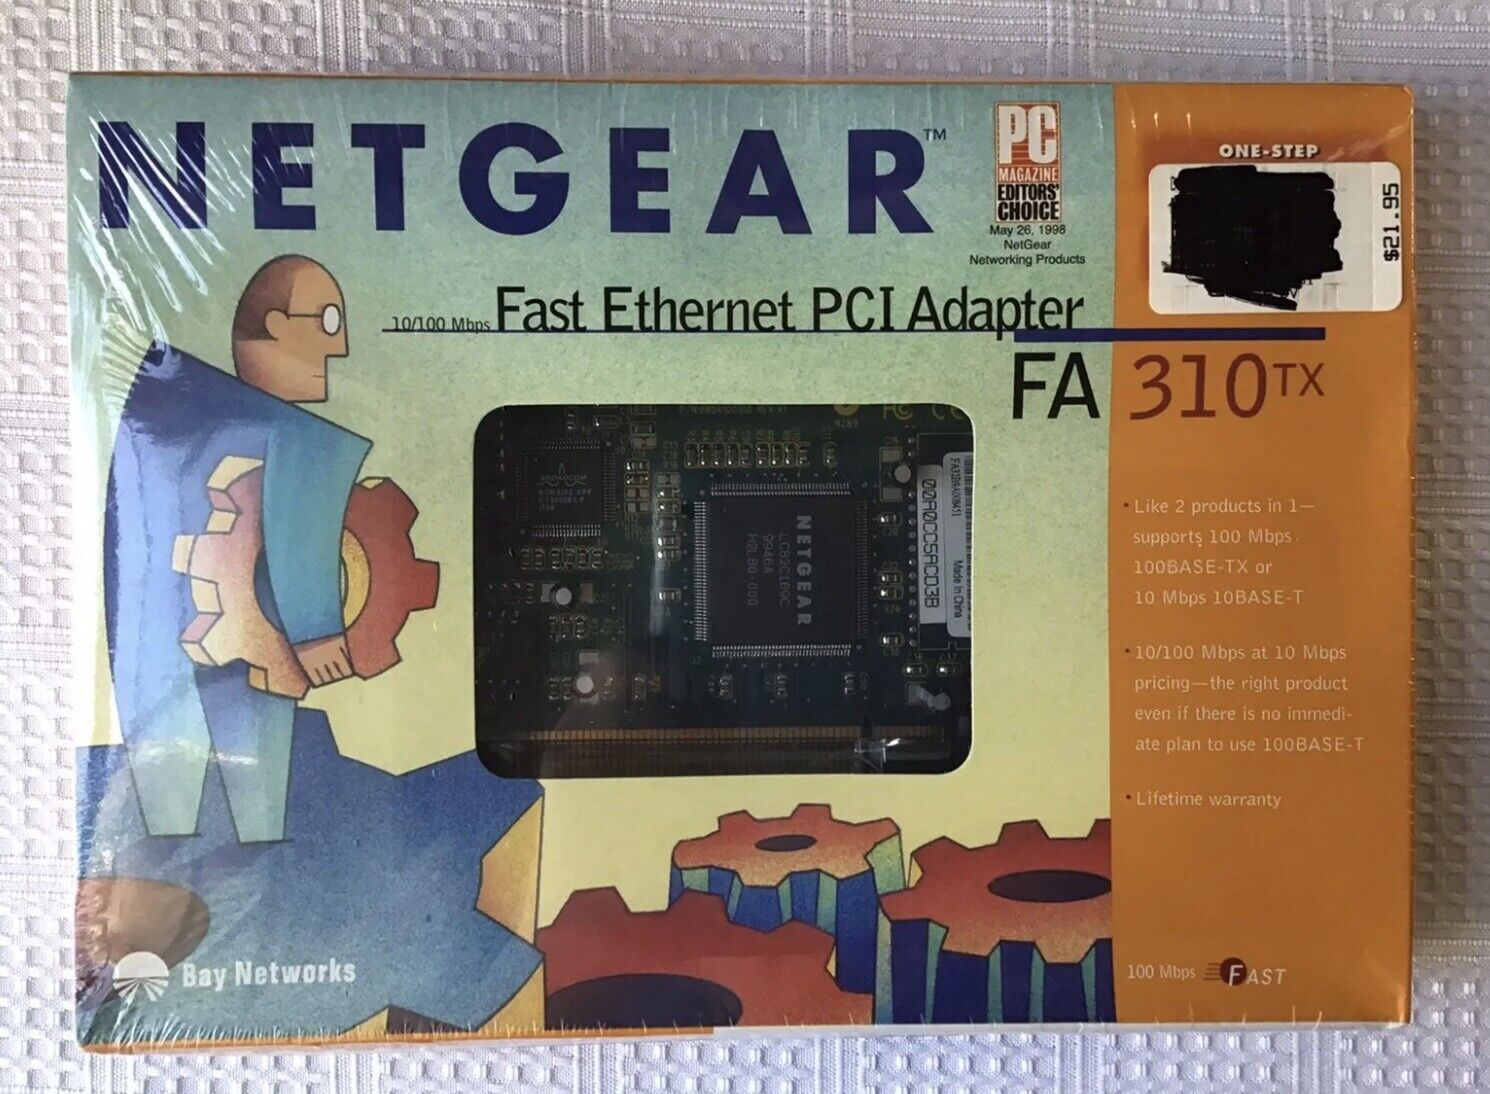 Netgear Fast Ethernet PCI Adapter FA 310 TX Bay Networks, New In Box